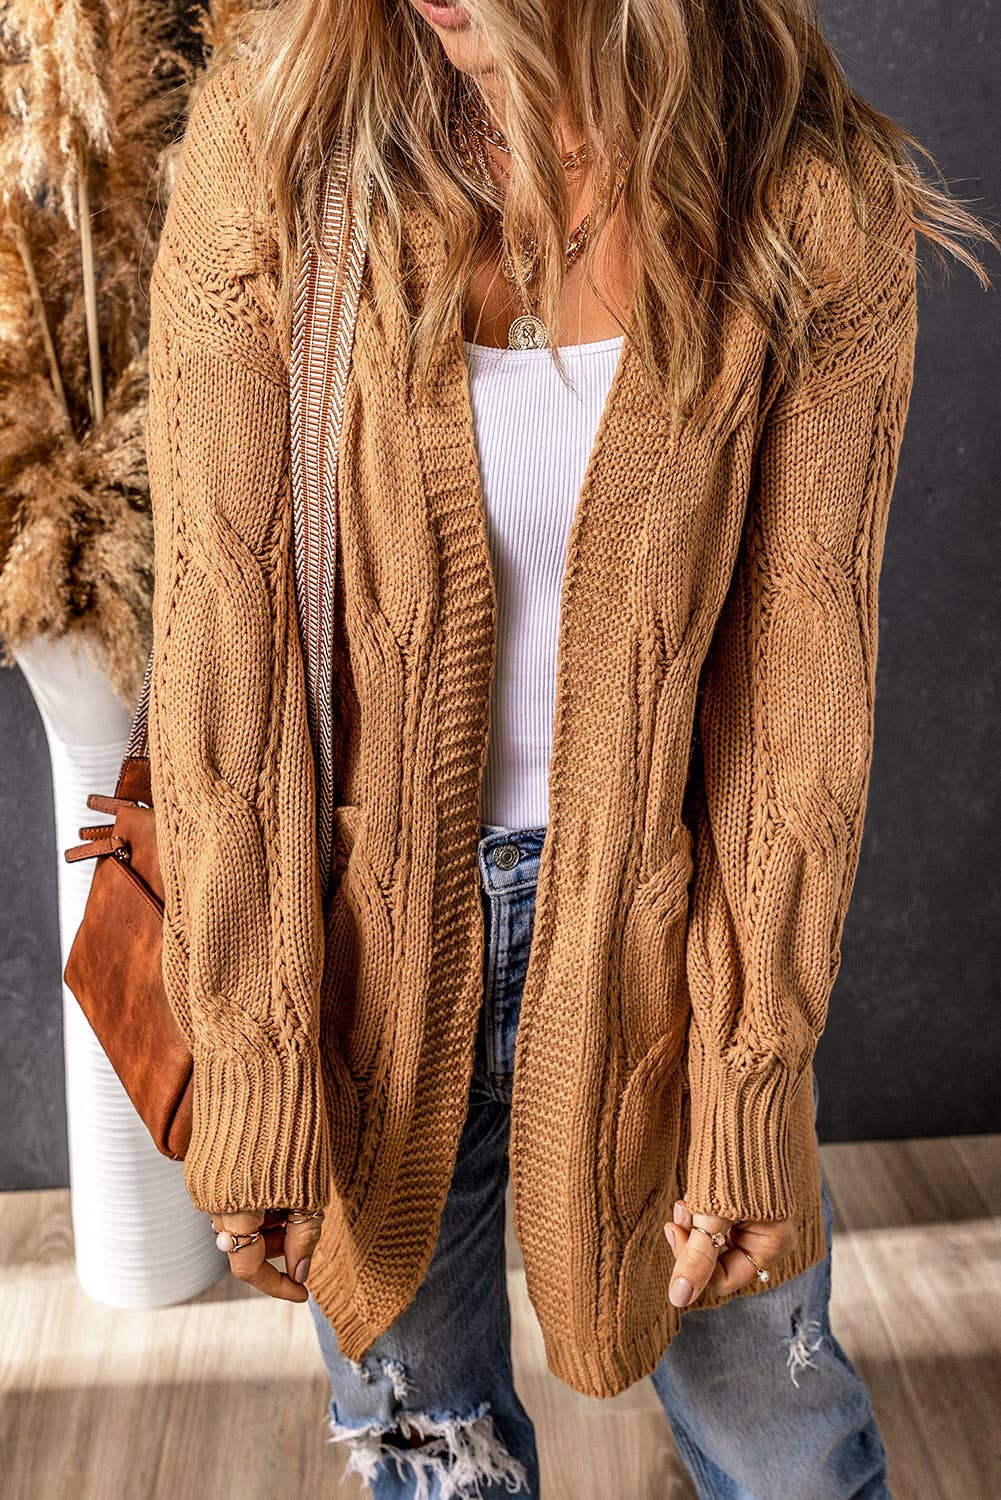 Textured Eyelet Ribbed Cable Knit Cardigan: 2XL / casual / Brown